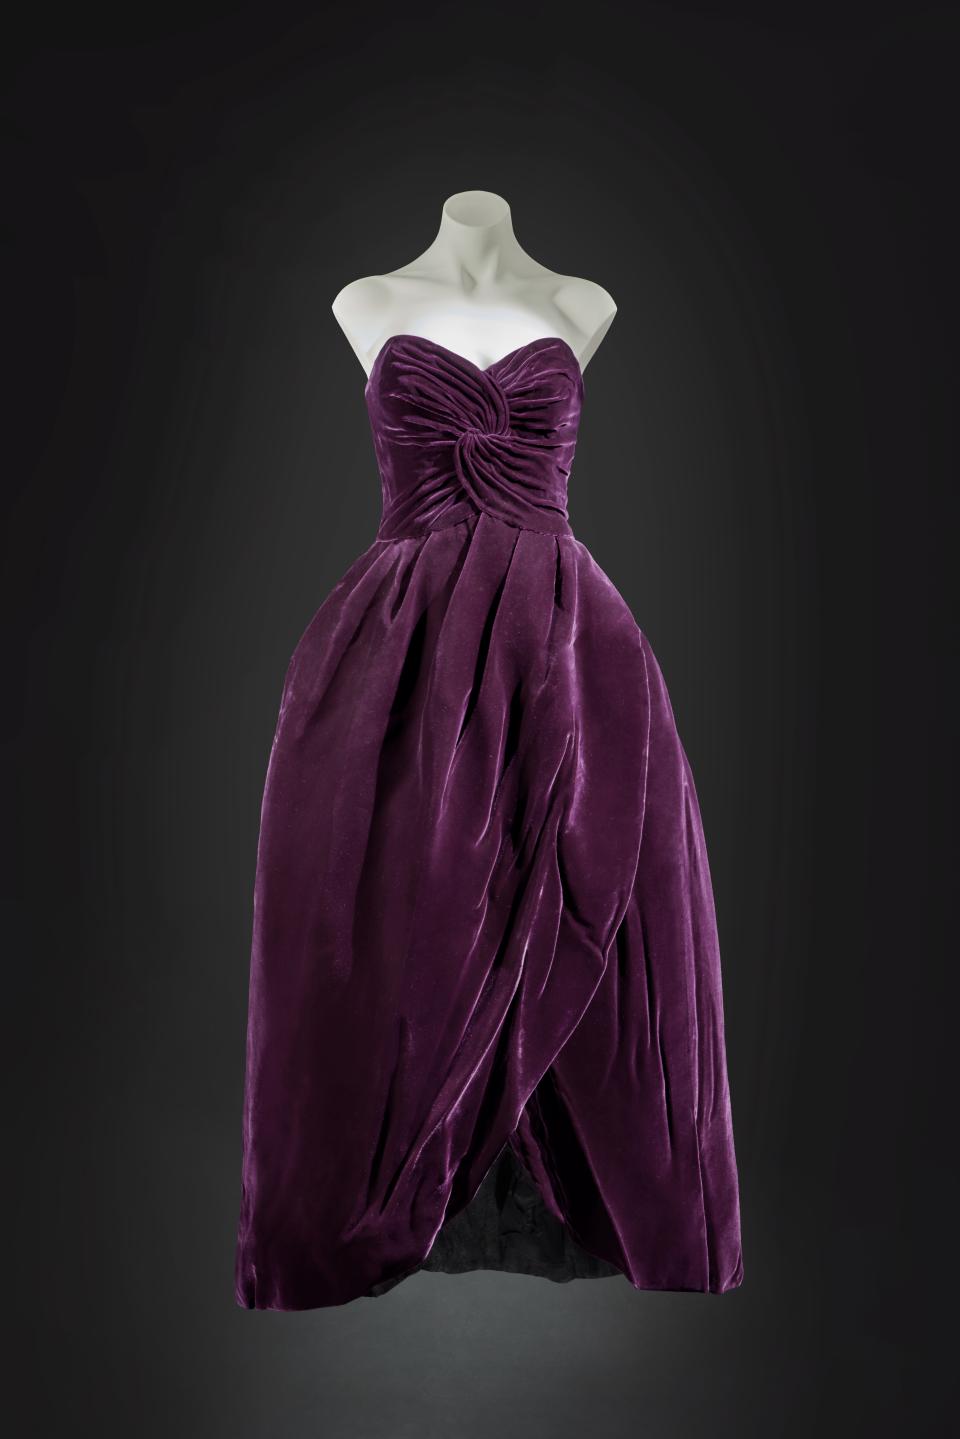 An aubergine velvet dress worn by the later late Diana, Princess of Wales, by Victor Edelstein 